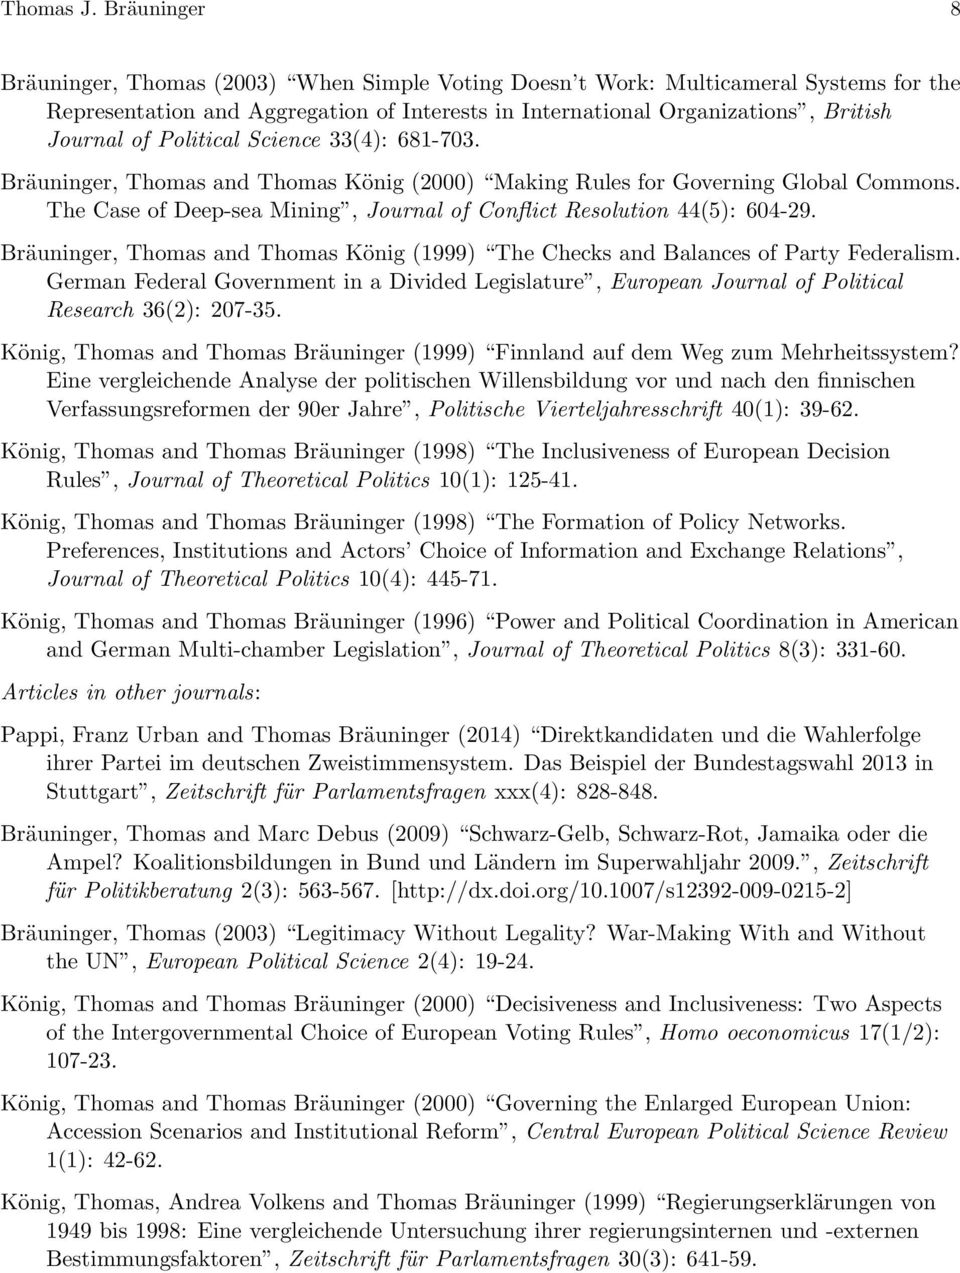 Political Science 33(4): 681-703. Bräuninger, Thomas and Thomas König (2000) Making Rules for Governing Global Commons. The Case of Deep-sea Mining, Journal of Conflict Resolution 44(5): 604-29.